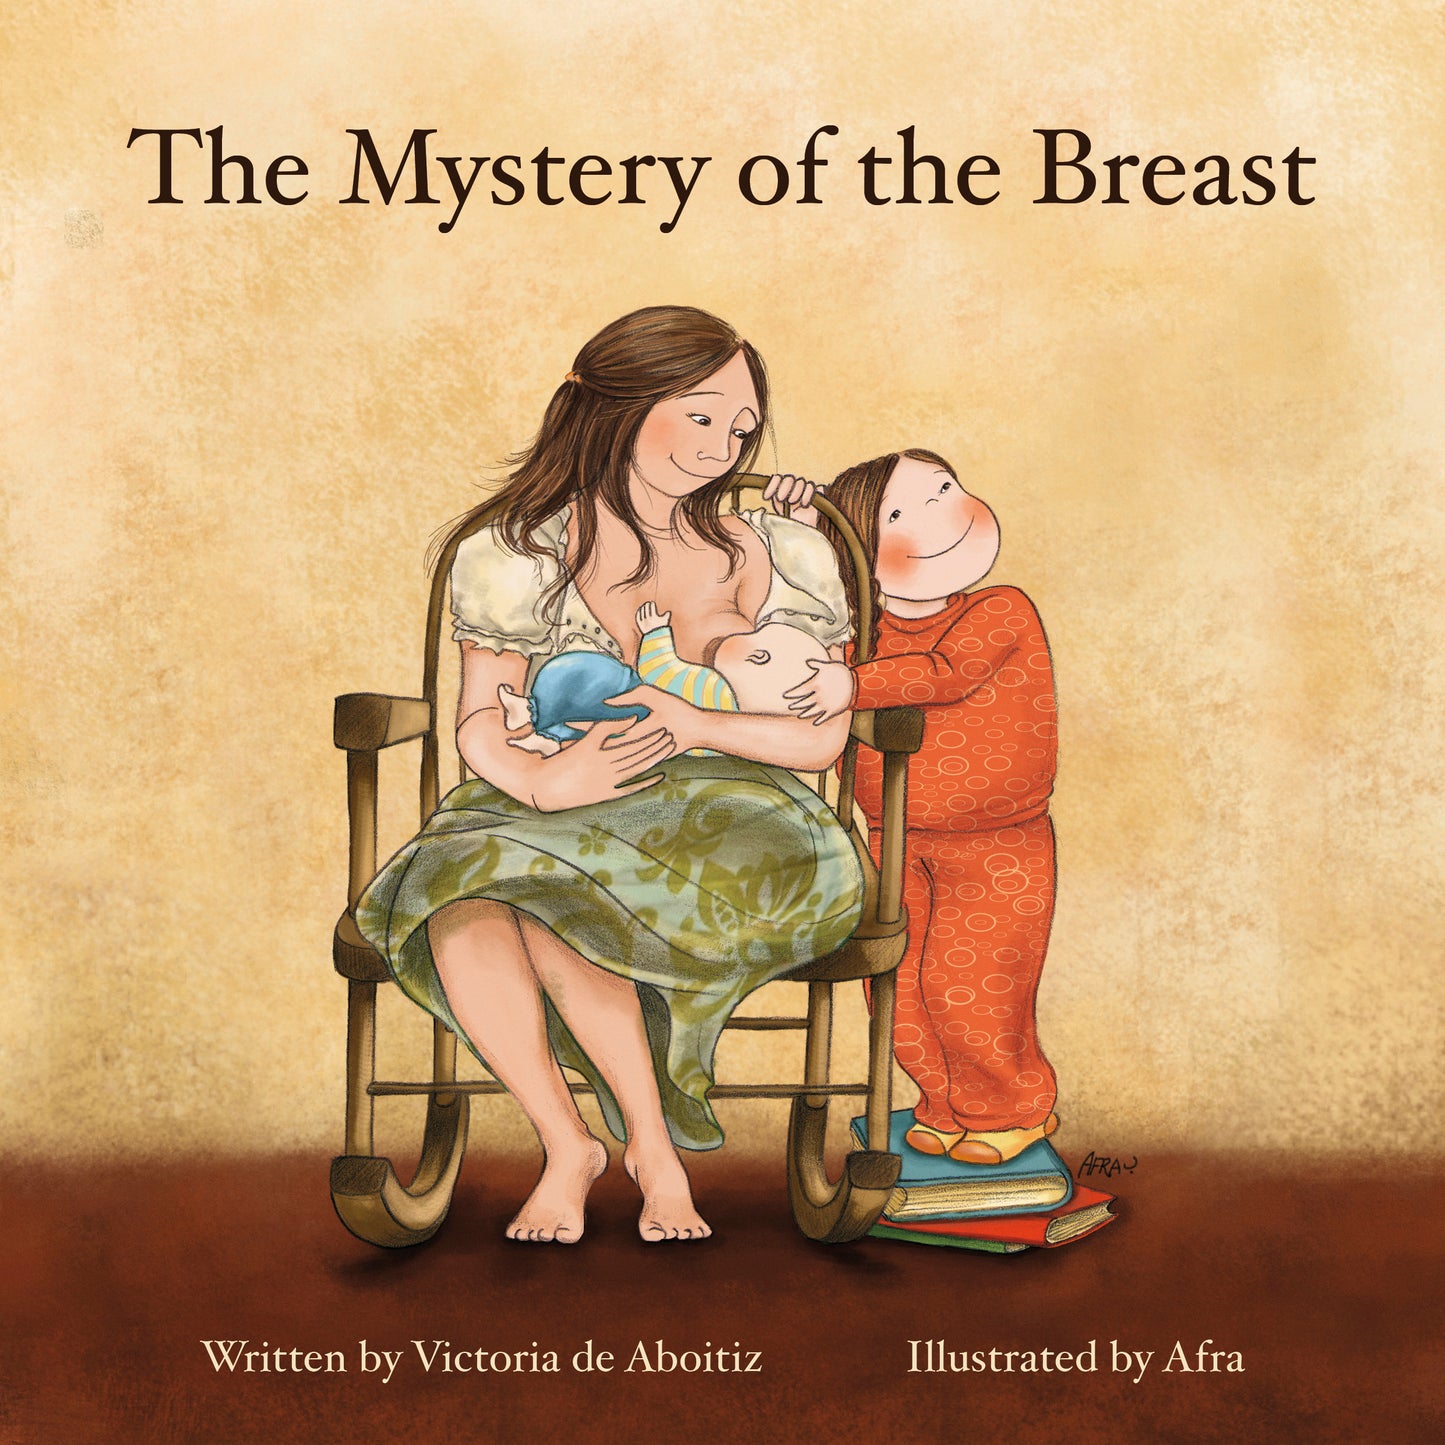 The Mystery of the Breast